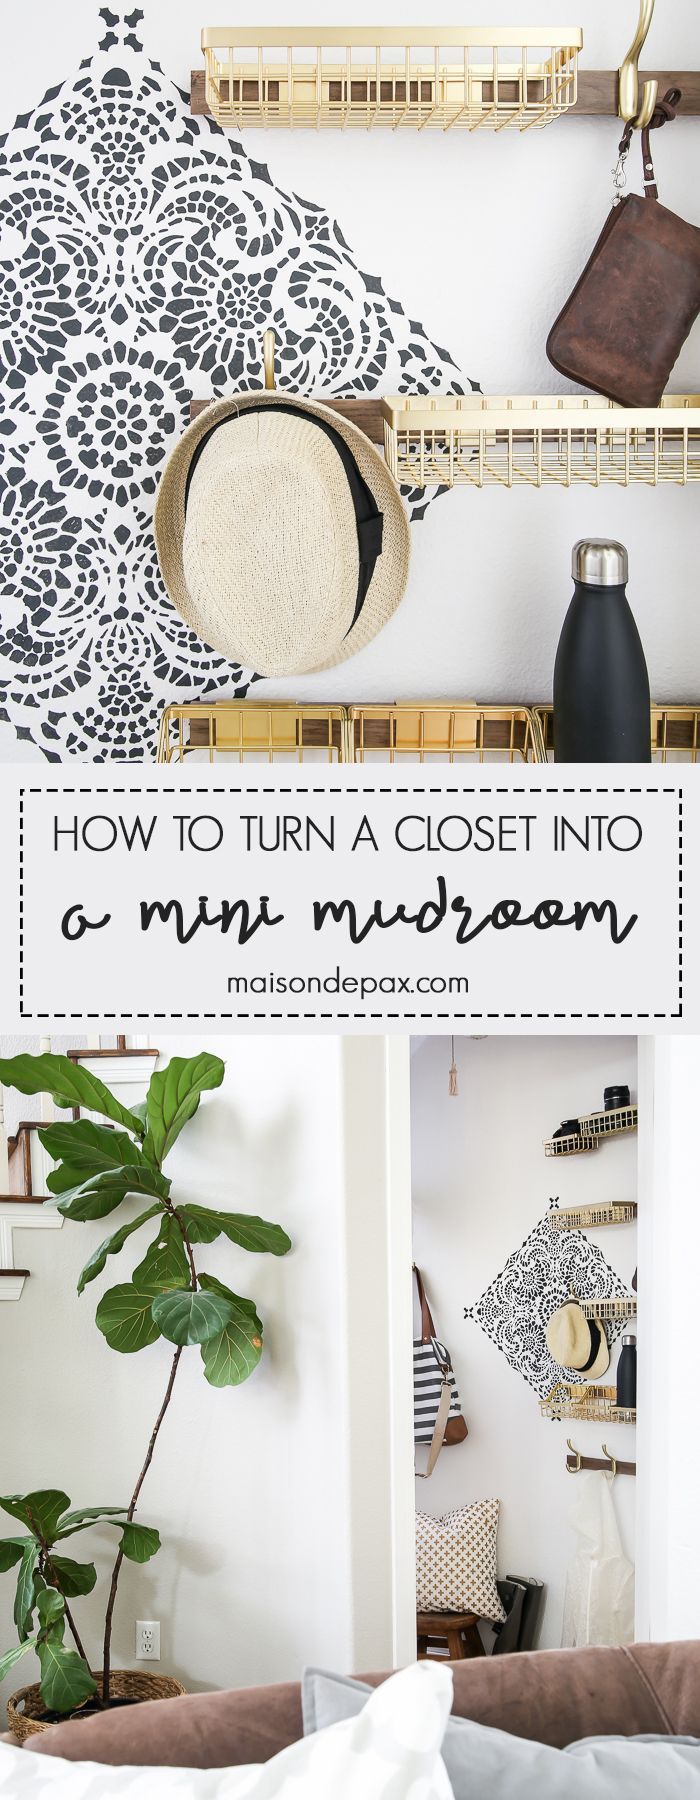 How to Turn a Closet into a Mudroom